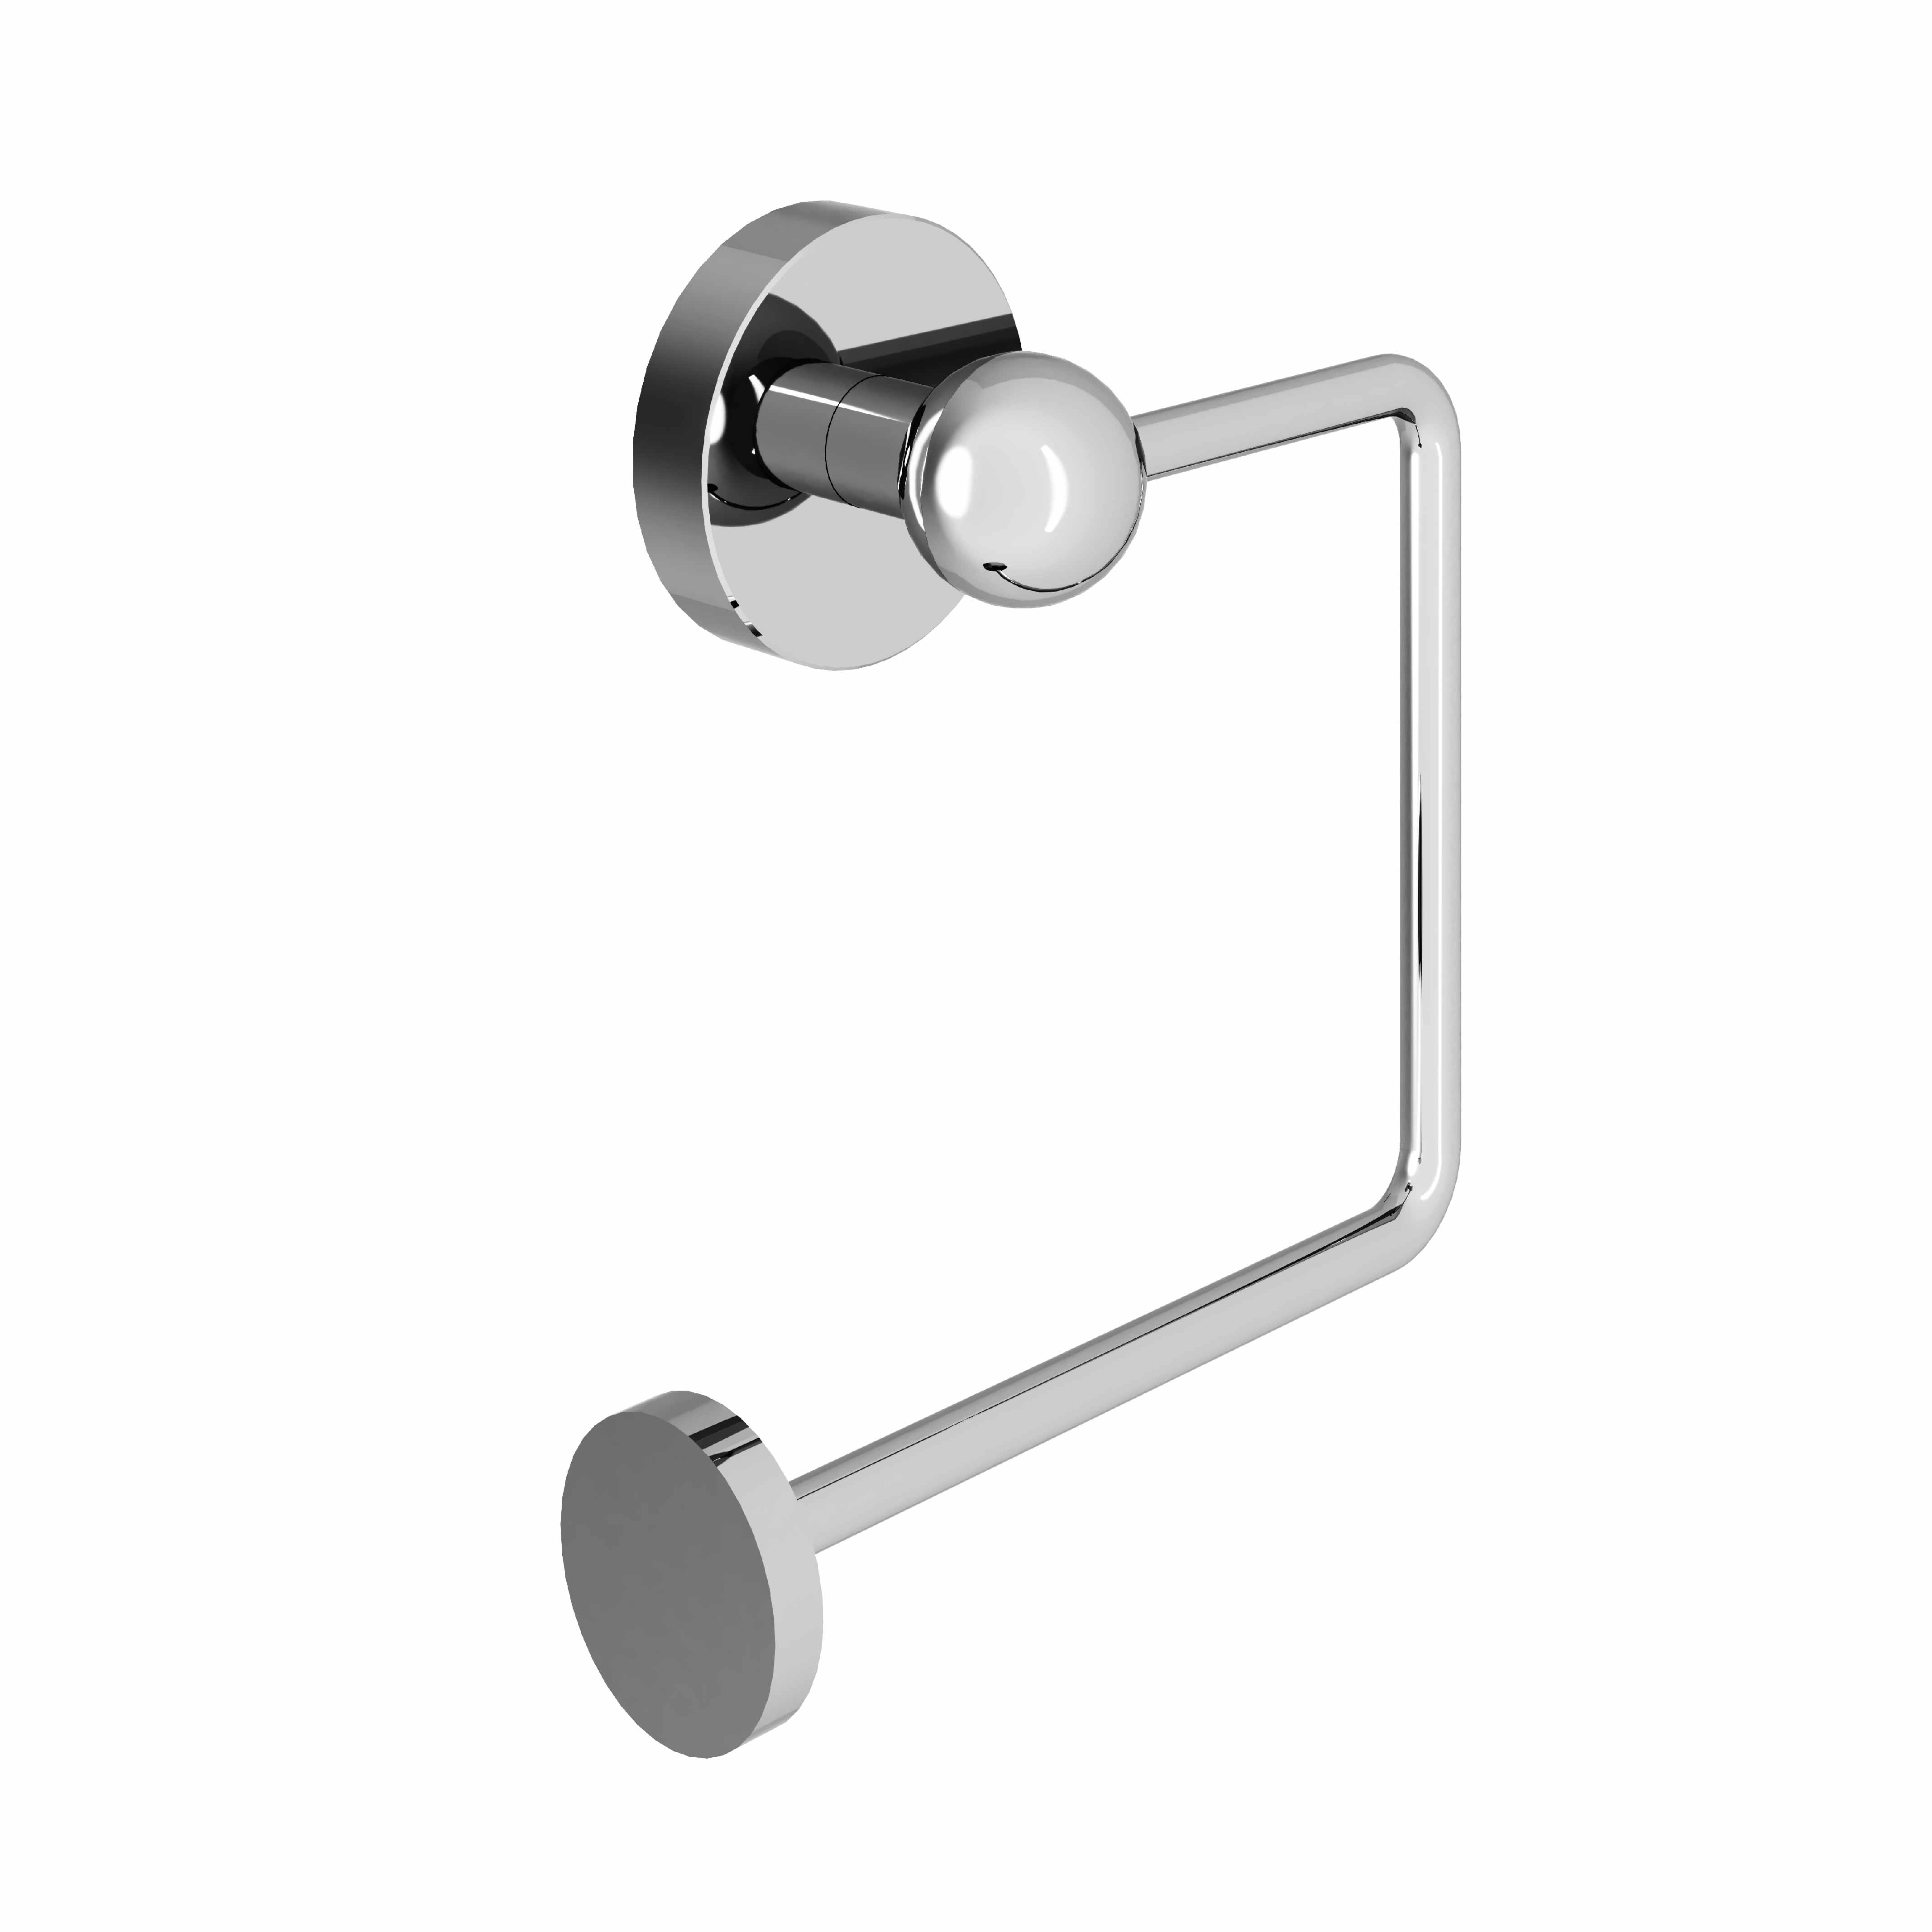 M91-504 Toilet roll holder without cover